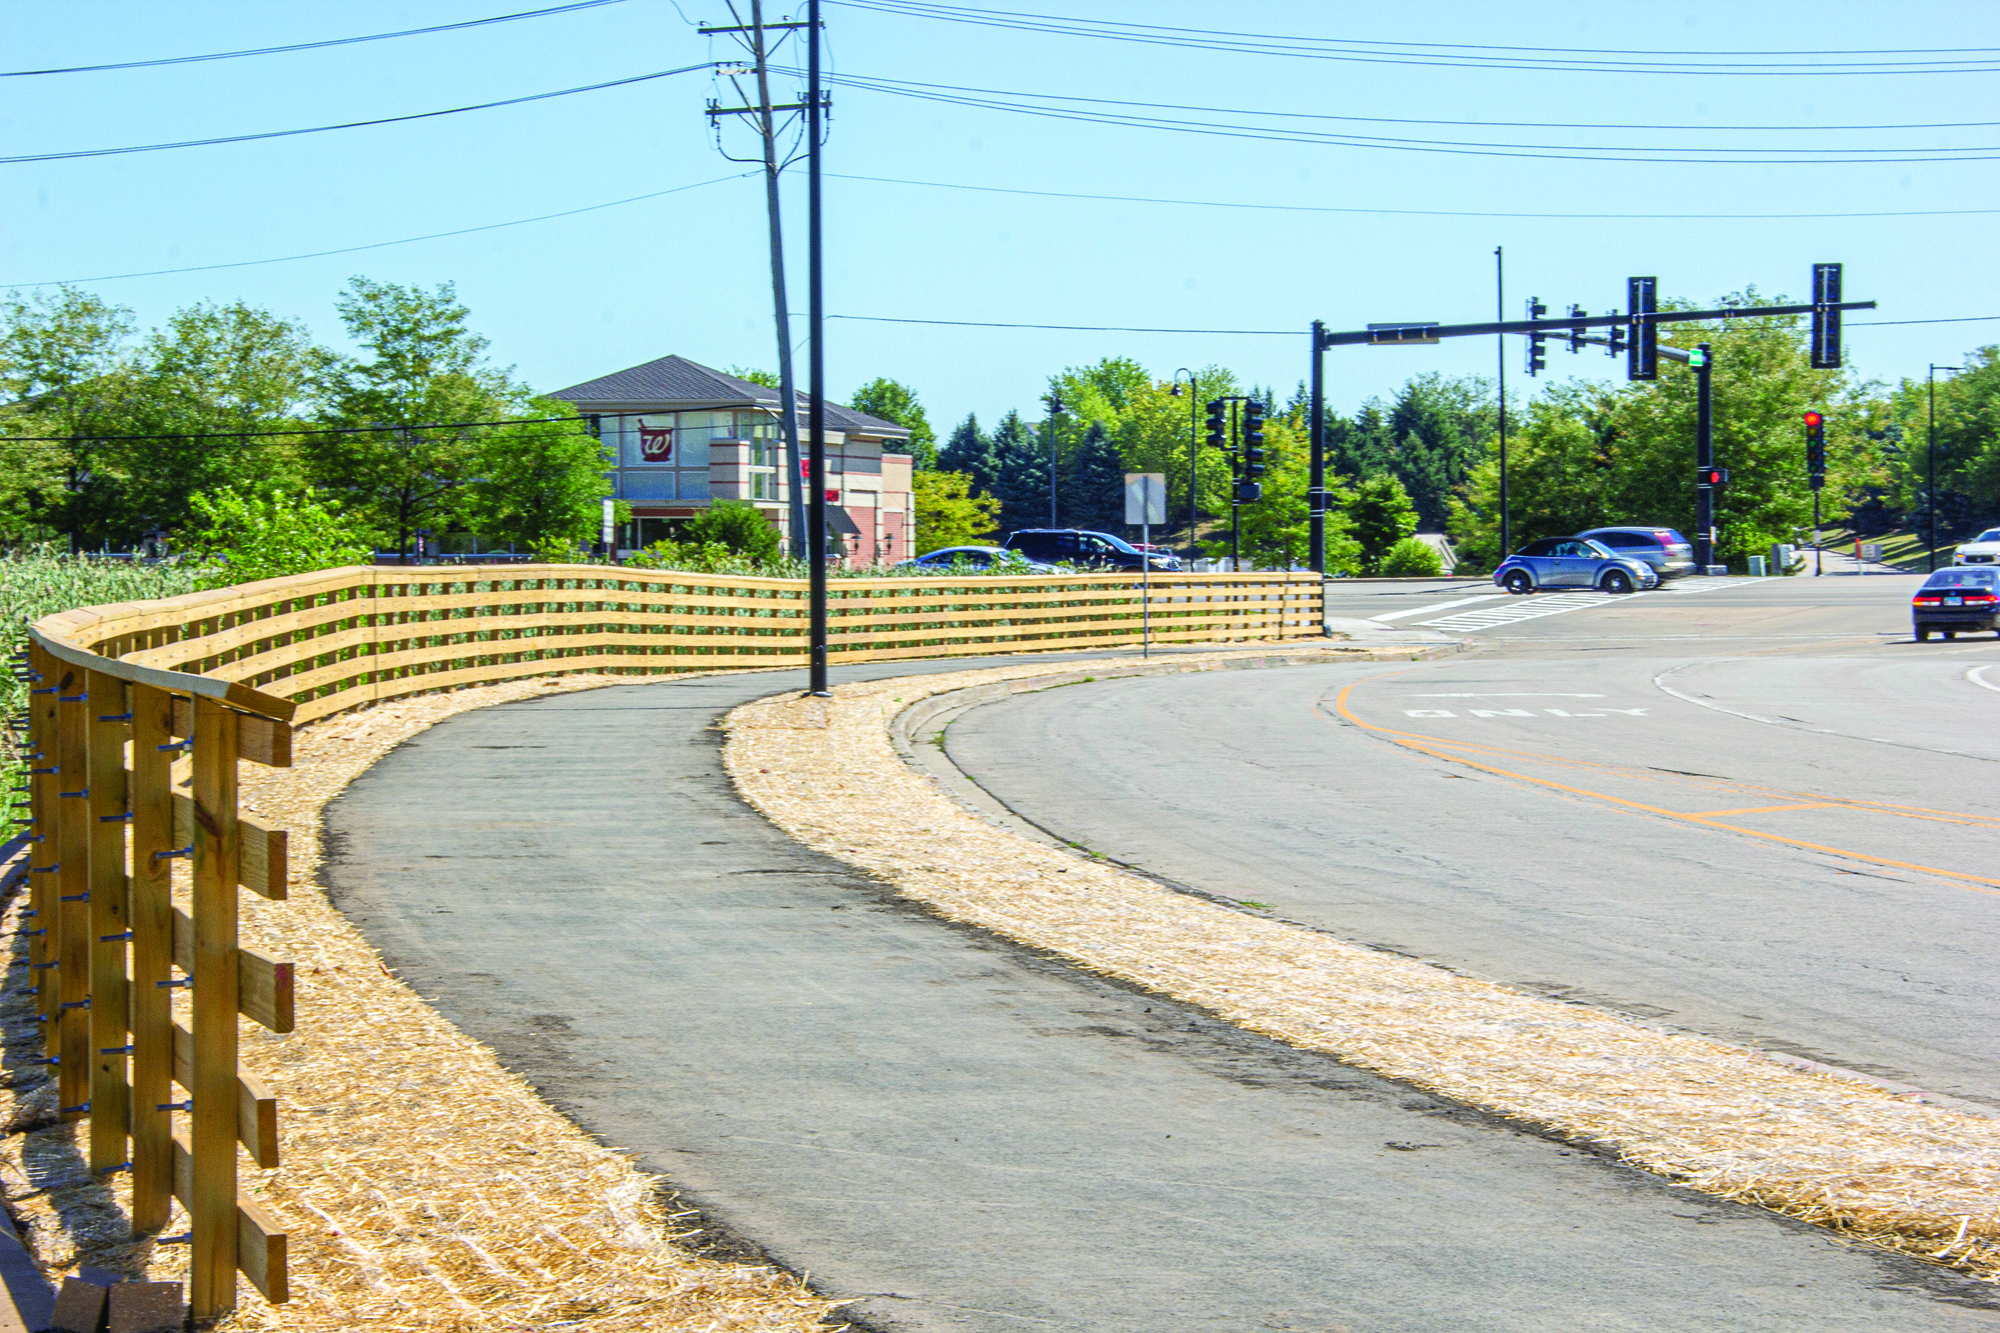 The multi-use path along Reed Rd. was developed and engineered as part of IDOT’s Illinois Transportation Enhancement Program (ITEP)